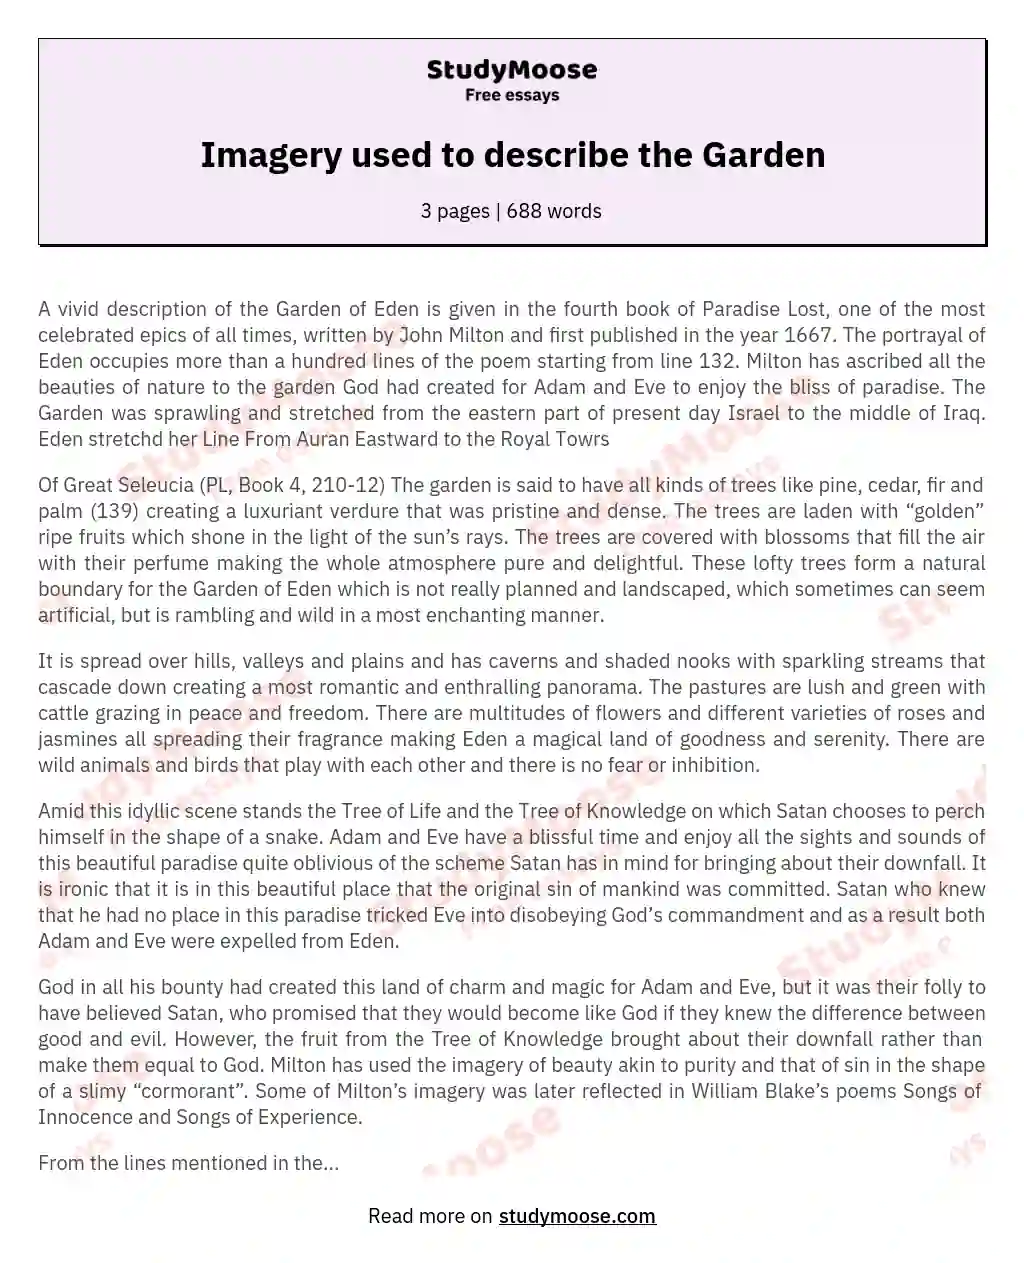 Imagery used to describe the Garden essay